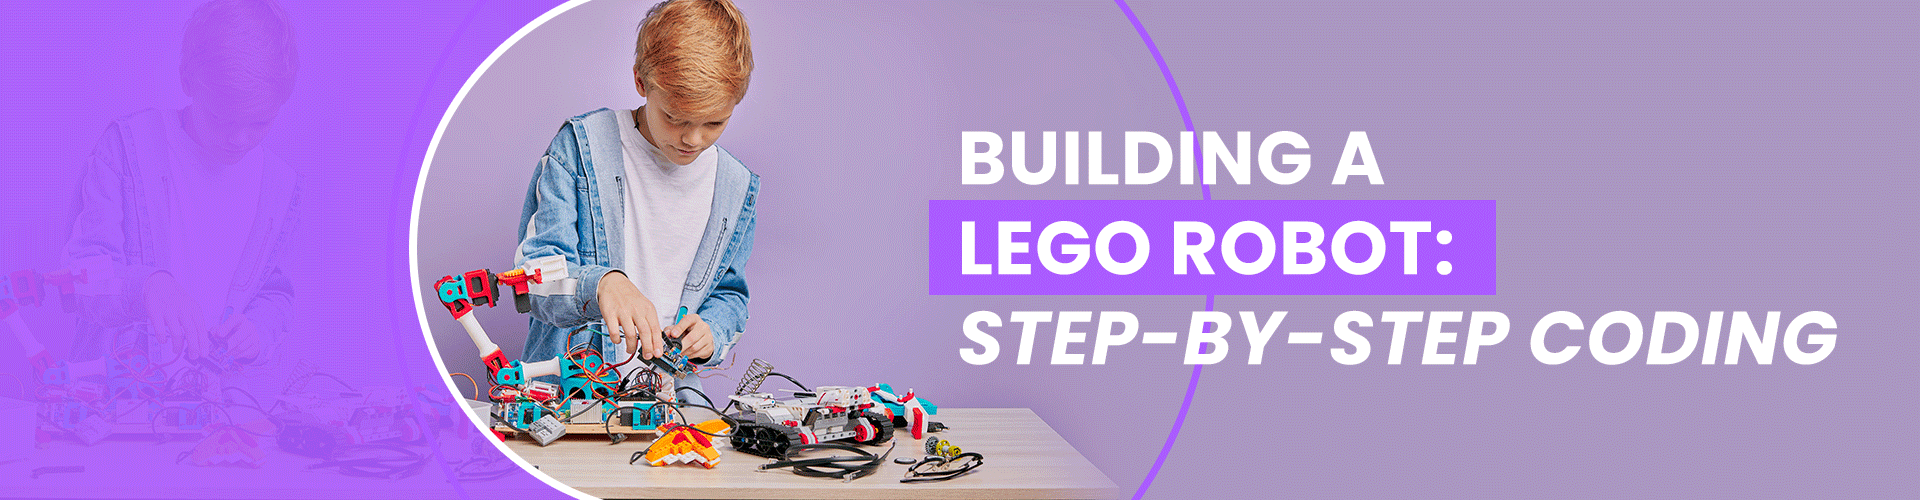 Building a LEGO Robot: Step-by-Step Coding